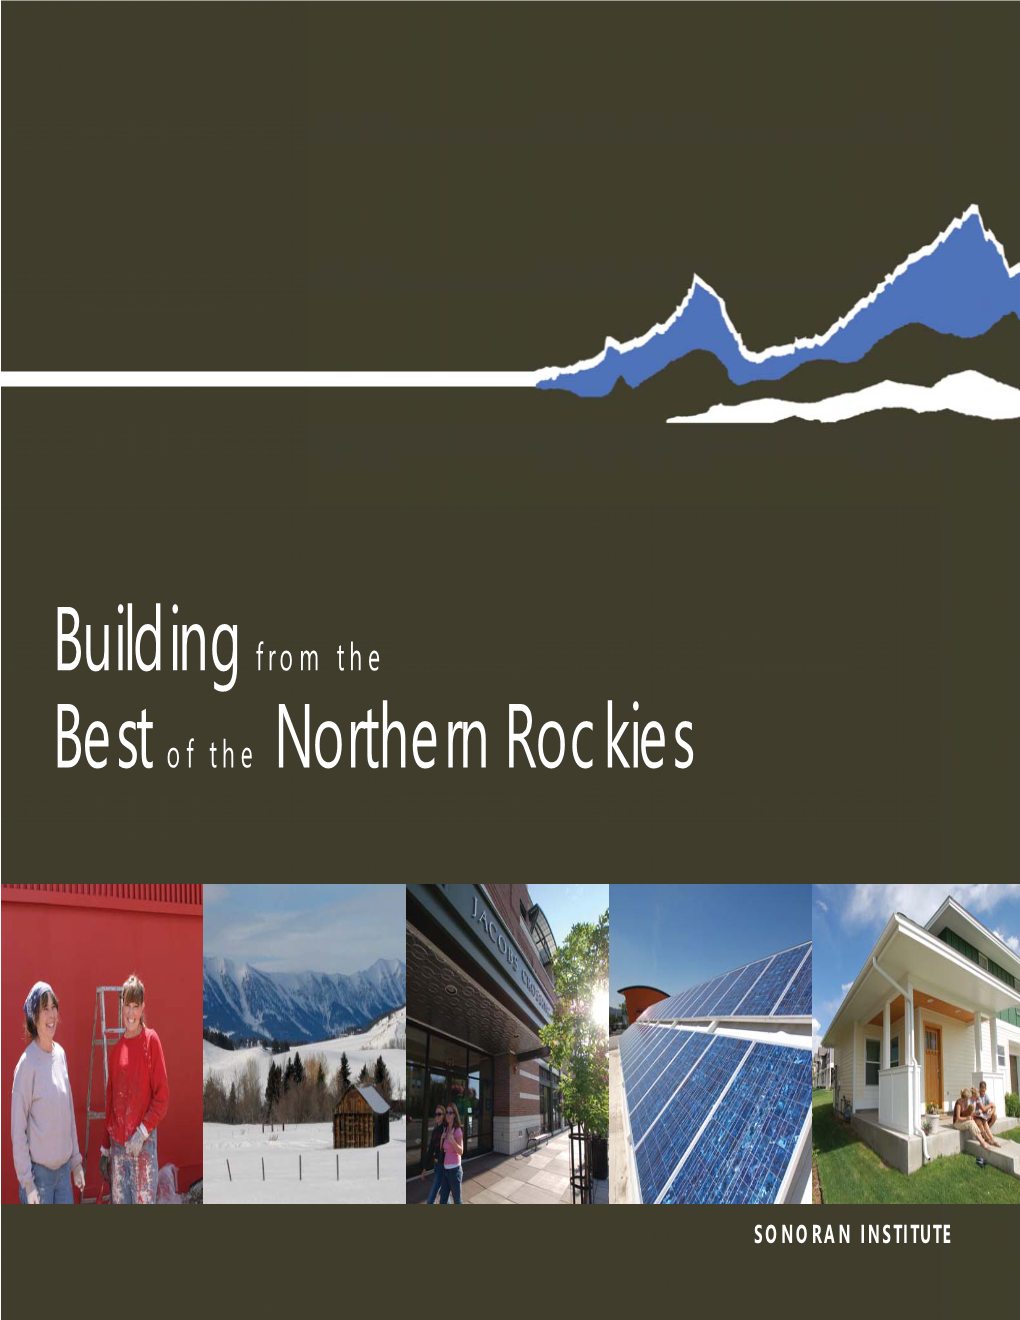 Building from the Best of the Northern Rockies